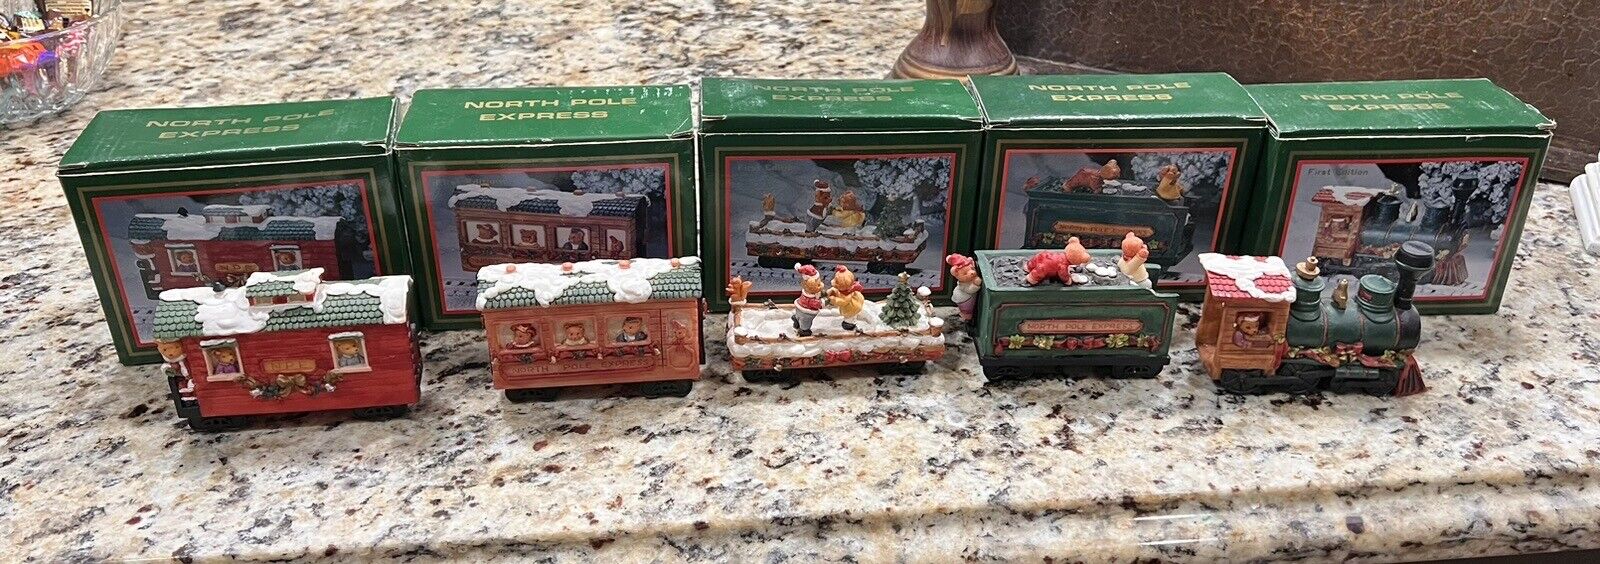 World Bazaars Inc North Pole Express Train First Edition Complete Set Of 5 Boxes